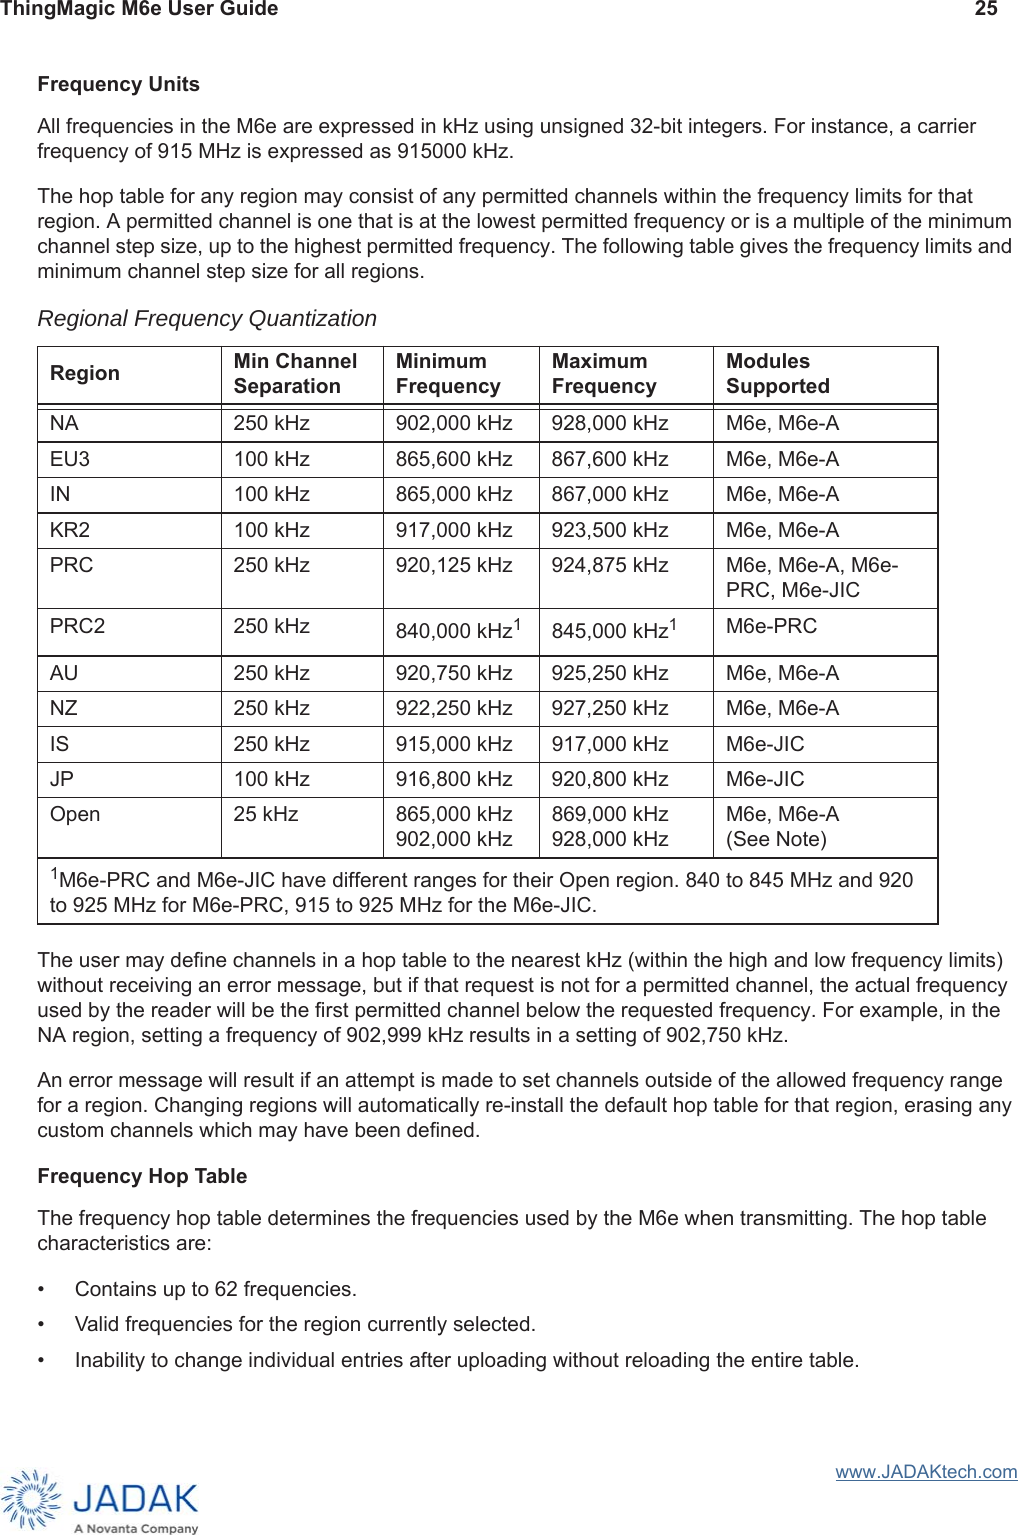 ThingMagic M6e User Guide 25www.JADAKtech.comFrequency UnitsAll frequencies in the M6e are expressed in kHz using unsigned 32-bit integers. For instance, a carrier frequency of 915 MHz is expressed as 915000 kHz.The hop table for any region may consist of any permitted channels within the frequency limits for that region. A permitted channel is one that is at the lowest permitted frequency or is a multiple of the minimum channel step size, up to the highest permitted frequency. The following table gives the frequency limits and minimum channel step size for all regions. The user may define channels in a hop table to the nearest kHz (within the high and low frequency limits) without receiving an error message, but if that request is not for a permitted channel, the actual frequency used by the reader will be the first permitted channel below the requested frequency. For example, in the NA region, setting a frequency of 902,999 kHz results in a setting of 902,750 kHz.An error message will result if an attempt is made to set channels outside of the allowed frequency range for a region. Changing regions will automatically re-install the default hop table for that region, erasing any custom channels which may have been defined. Frequency Hop TableThe frequency hop table determines the frequencies used by the M6e when transmitting. The hop table characteristics are:• Contains up to 62 frequencies. • Valid frequencies for the region currently selected.• Inability to change individual entries after uploading without reloading the entire table. Regional Frequency QuantizationRegion Min Channel SeparationMinimumFrequencyMaximumFrequencyModulesSupportedNA 250 kHz 902,000 kHz 928,000 kHz M6e, M6e-AEU3 100 kHz 865,600 kHz 867,600 kHz M6e, M6e-AIN 100 kHz 865,000 kHz 867,000 kHz M6e, M6e-AKR2 100 kHz 917,000 kHz 923,500 kHz M6e, M6e-APRC 250 kHz 920,125 kHz 924,875 kHz M6e, M6e-A, M6e-PRC, M6e-JICPRC2 250 kHz 840,000 kHz1845,000 kHz1M6e-PRCAU 250 kHz 920,750 kHz 925,250 kHz M6e, M6e-ANZ 250 kHz 922,250 kHz 927,250 kHz M6e, M6e-AIS 250 kHz 915,000 kHz 917,000 kHz M6e-JICJP 100 kHz 916,800 kHz 920,800 kHz M6e-JICOpen 25 kHz 865,000 kHz902,000 kHz869,000 kHz928,000 kHzM6e, M6e-A(See Note)1M6e-PRC and M6e-JIC have different ranges for their Open region. 840 to 845 MHz and 920 to 925 MHz for M6e-PRC, 915 to 925 MHz for the M6e-JIC.